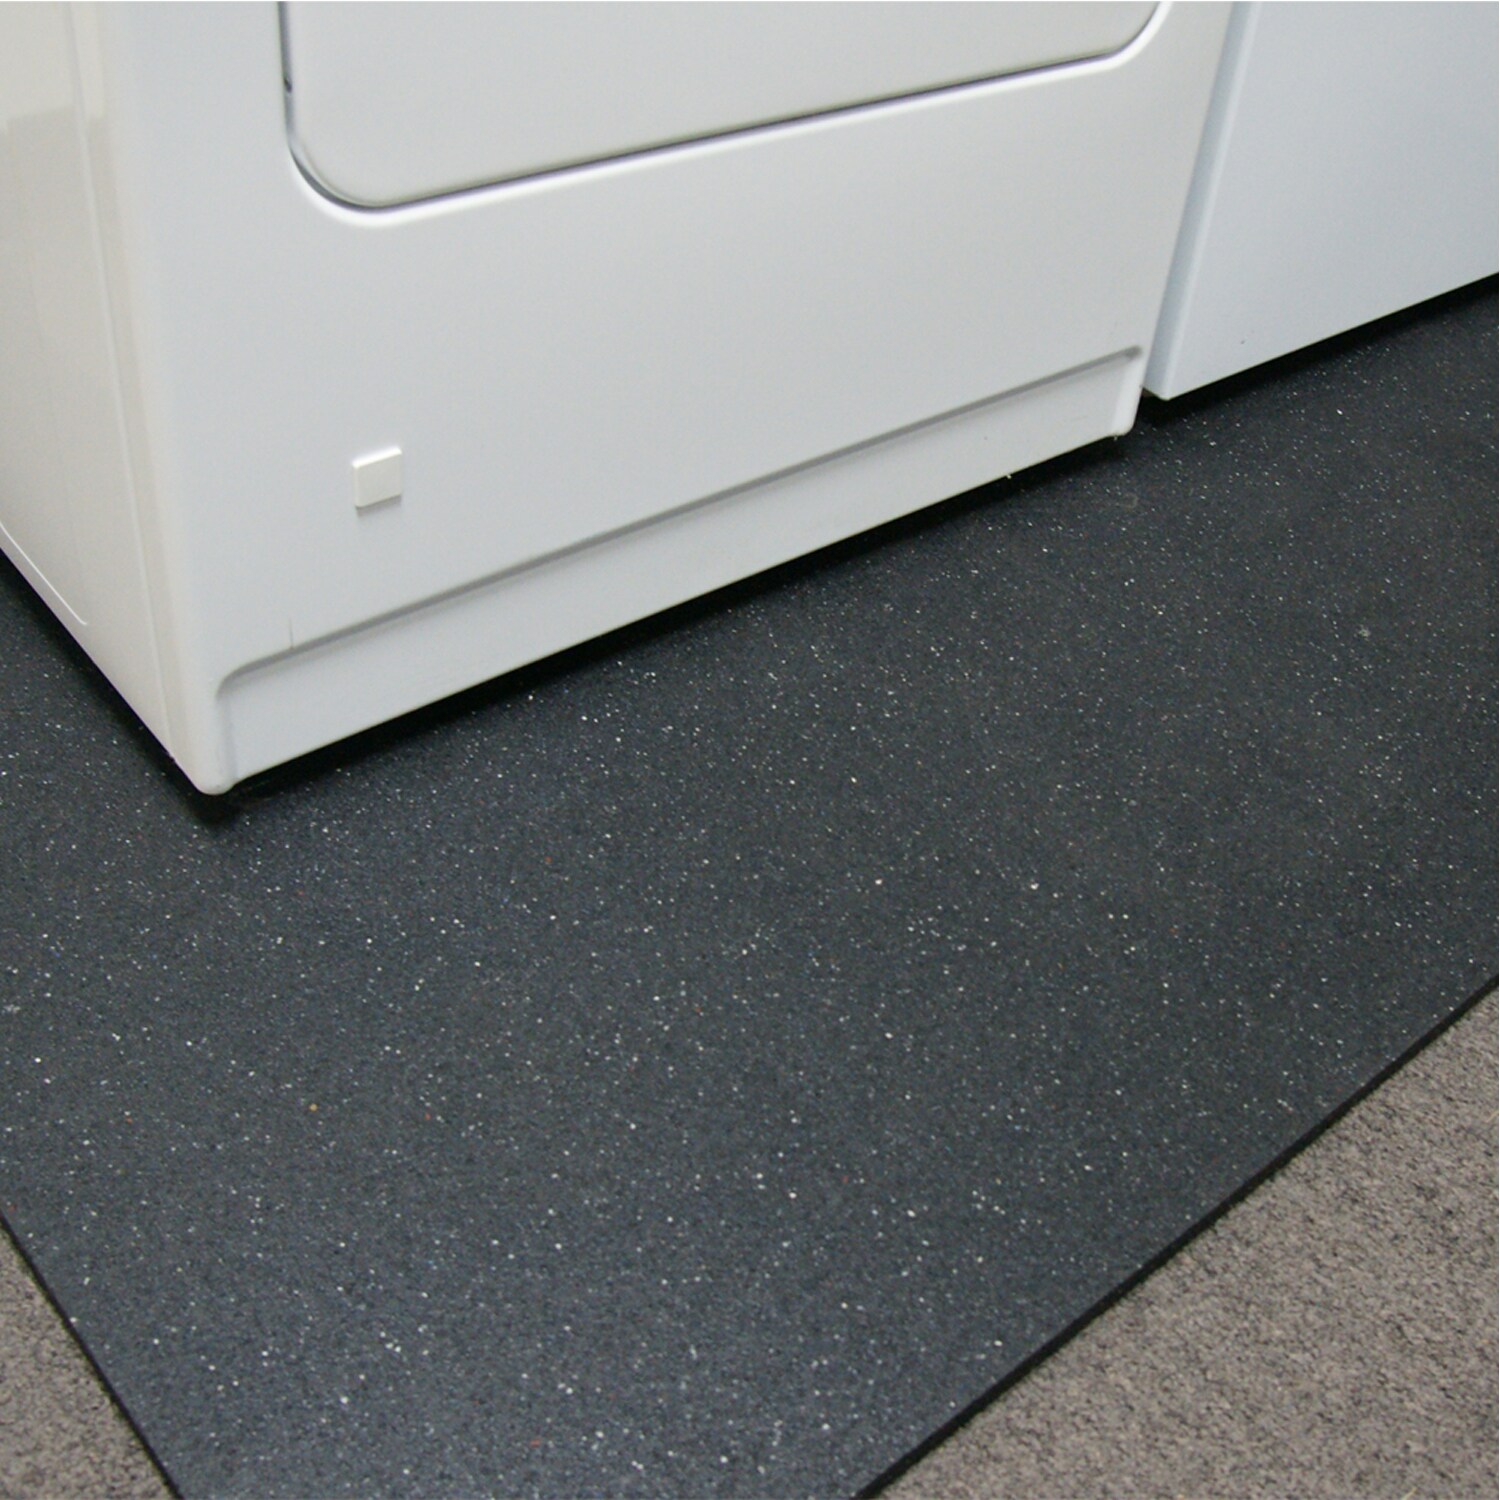 Goodyear Rubber Washer and Dryer Mat